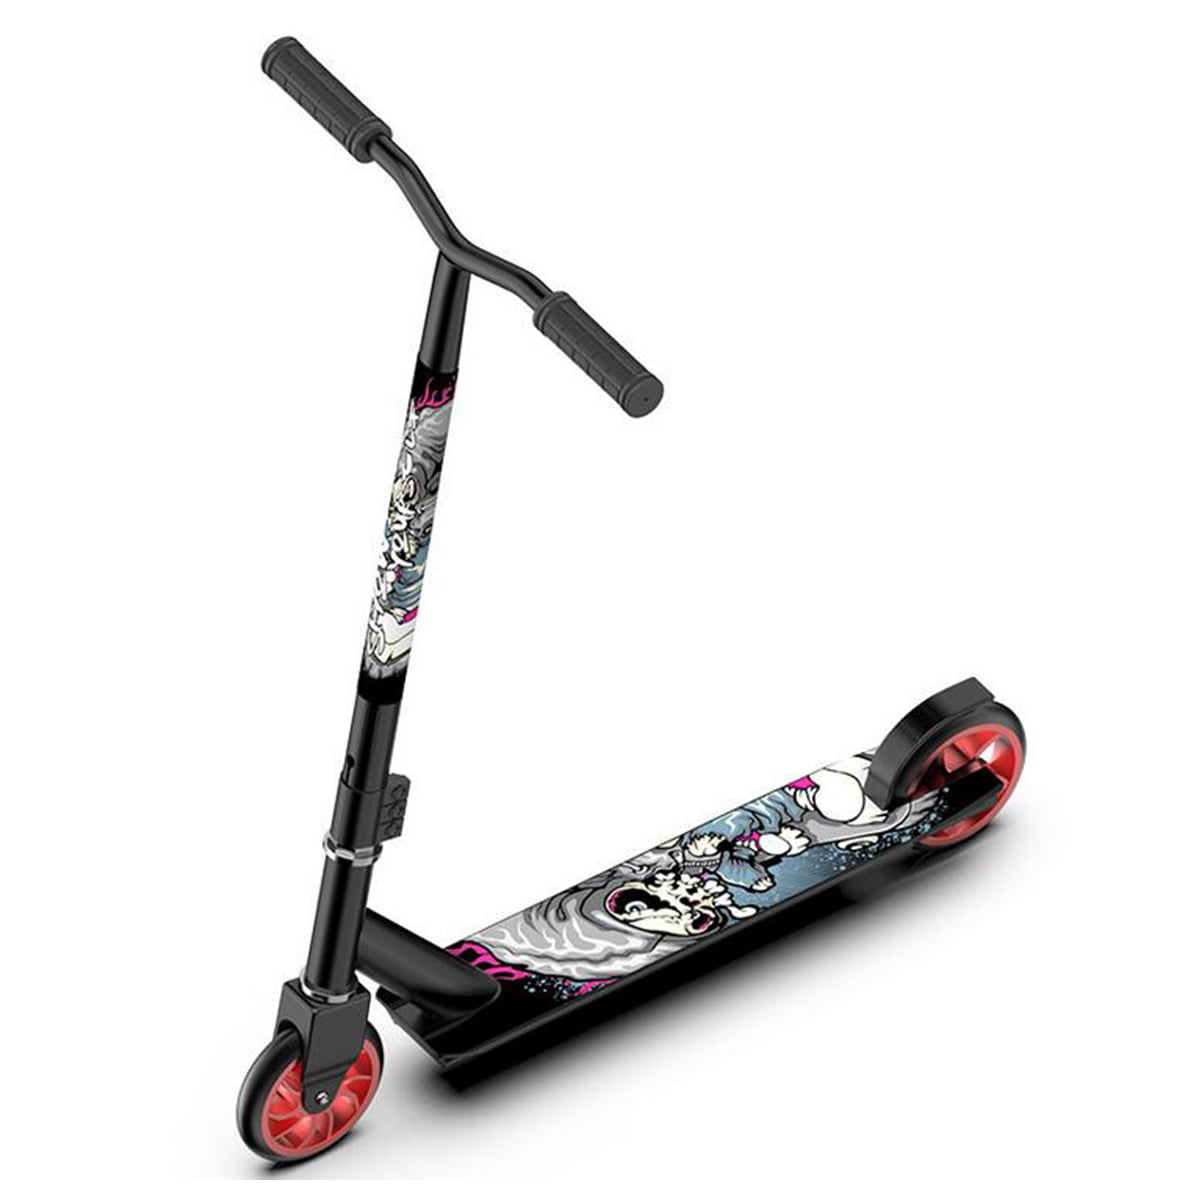 Pro Stunt Trick Scooter Complete W/ Strong Aluminum Deck for Teens Adult Kids 